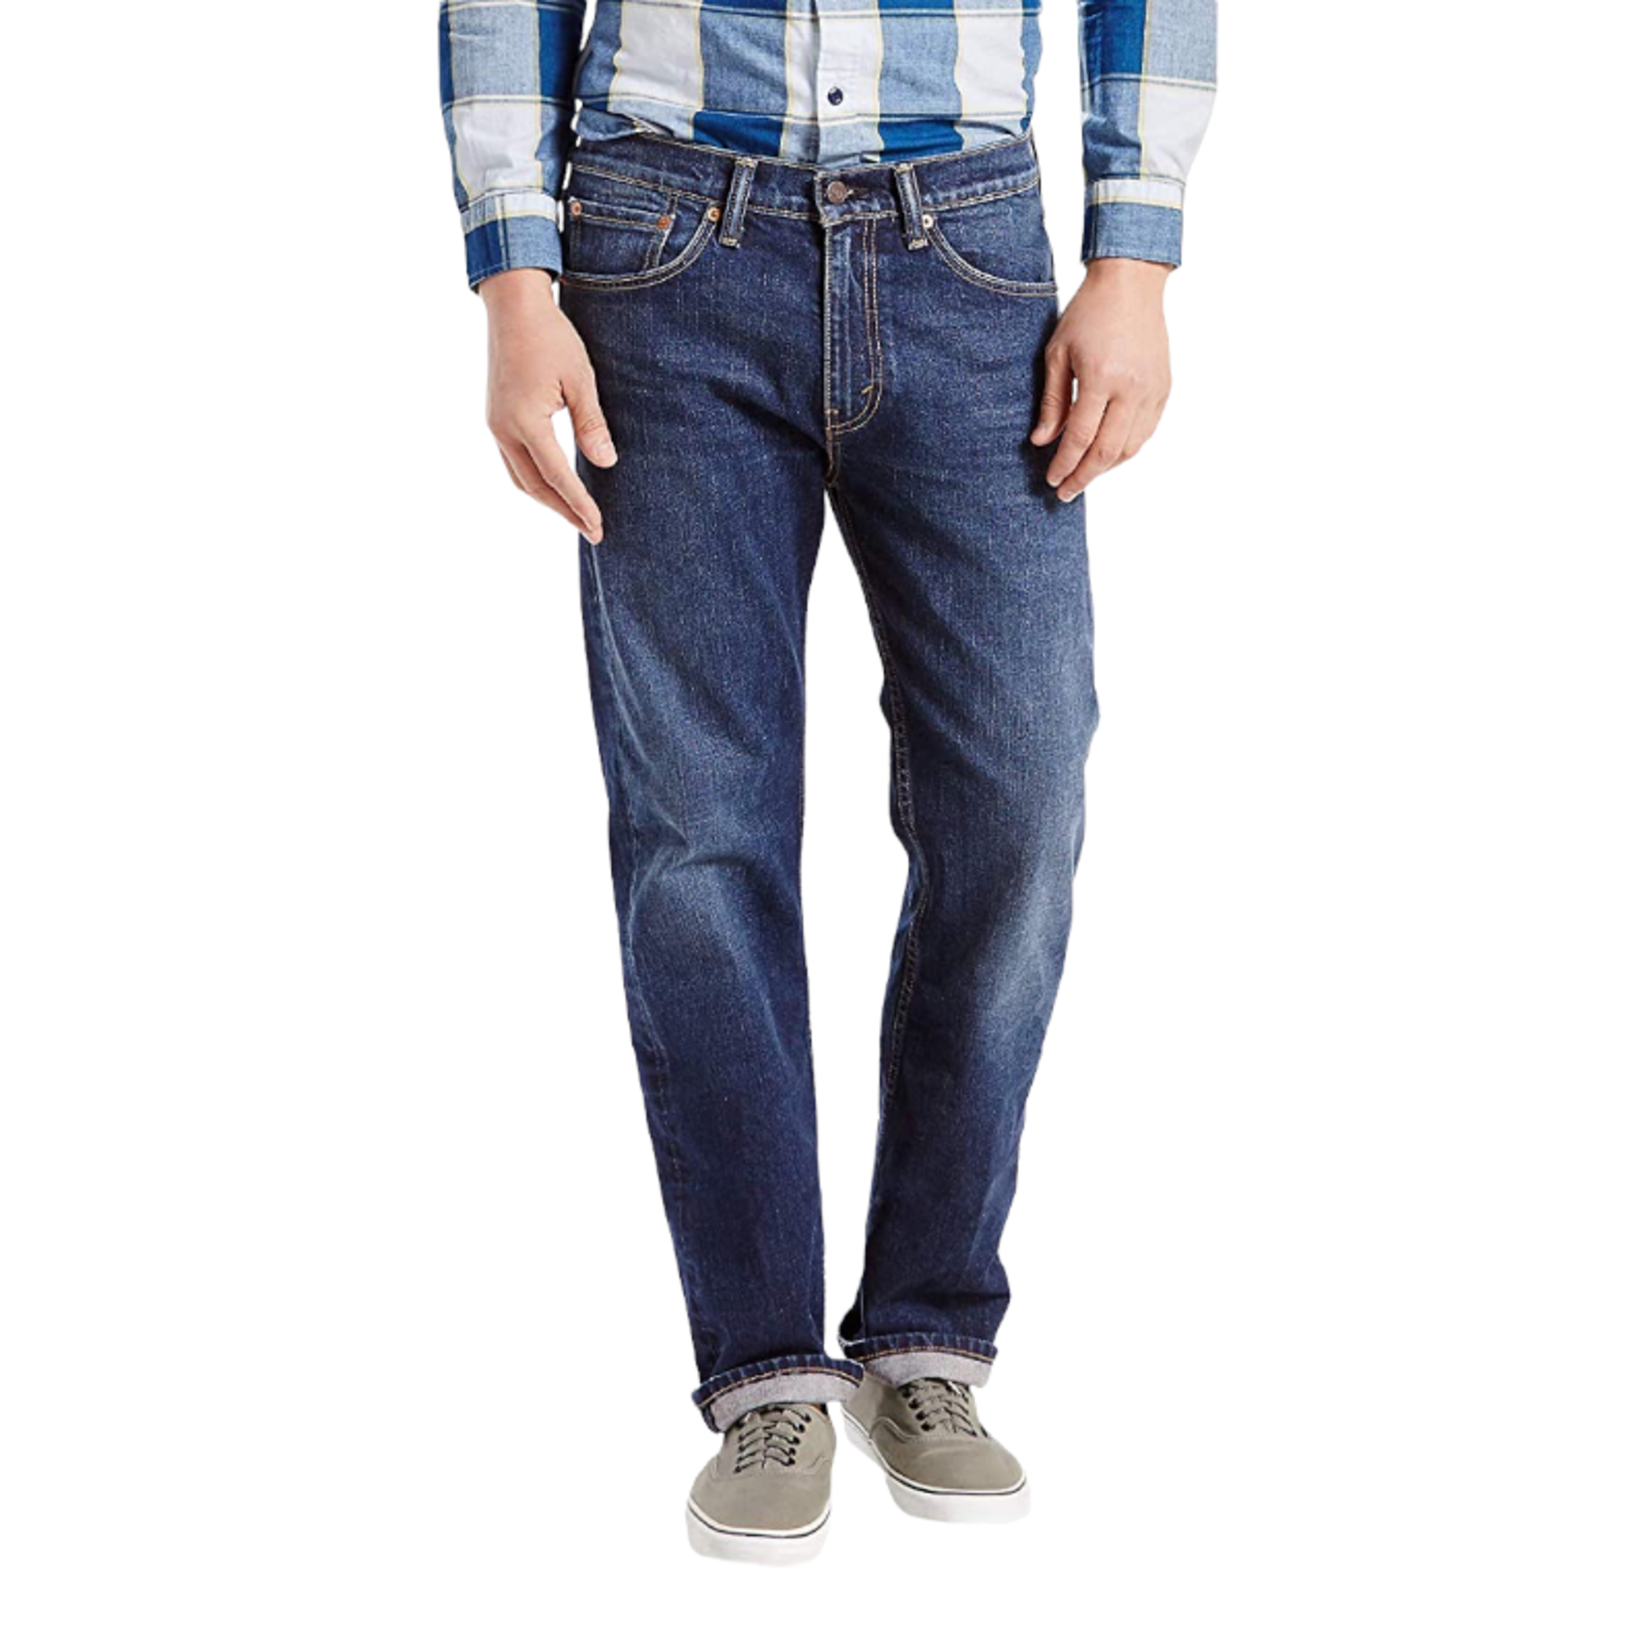 LEVIS 505 REGULAR FIT 00505-1455 - Michael's and Jody's